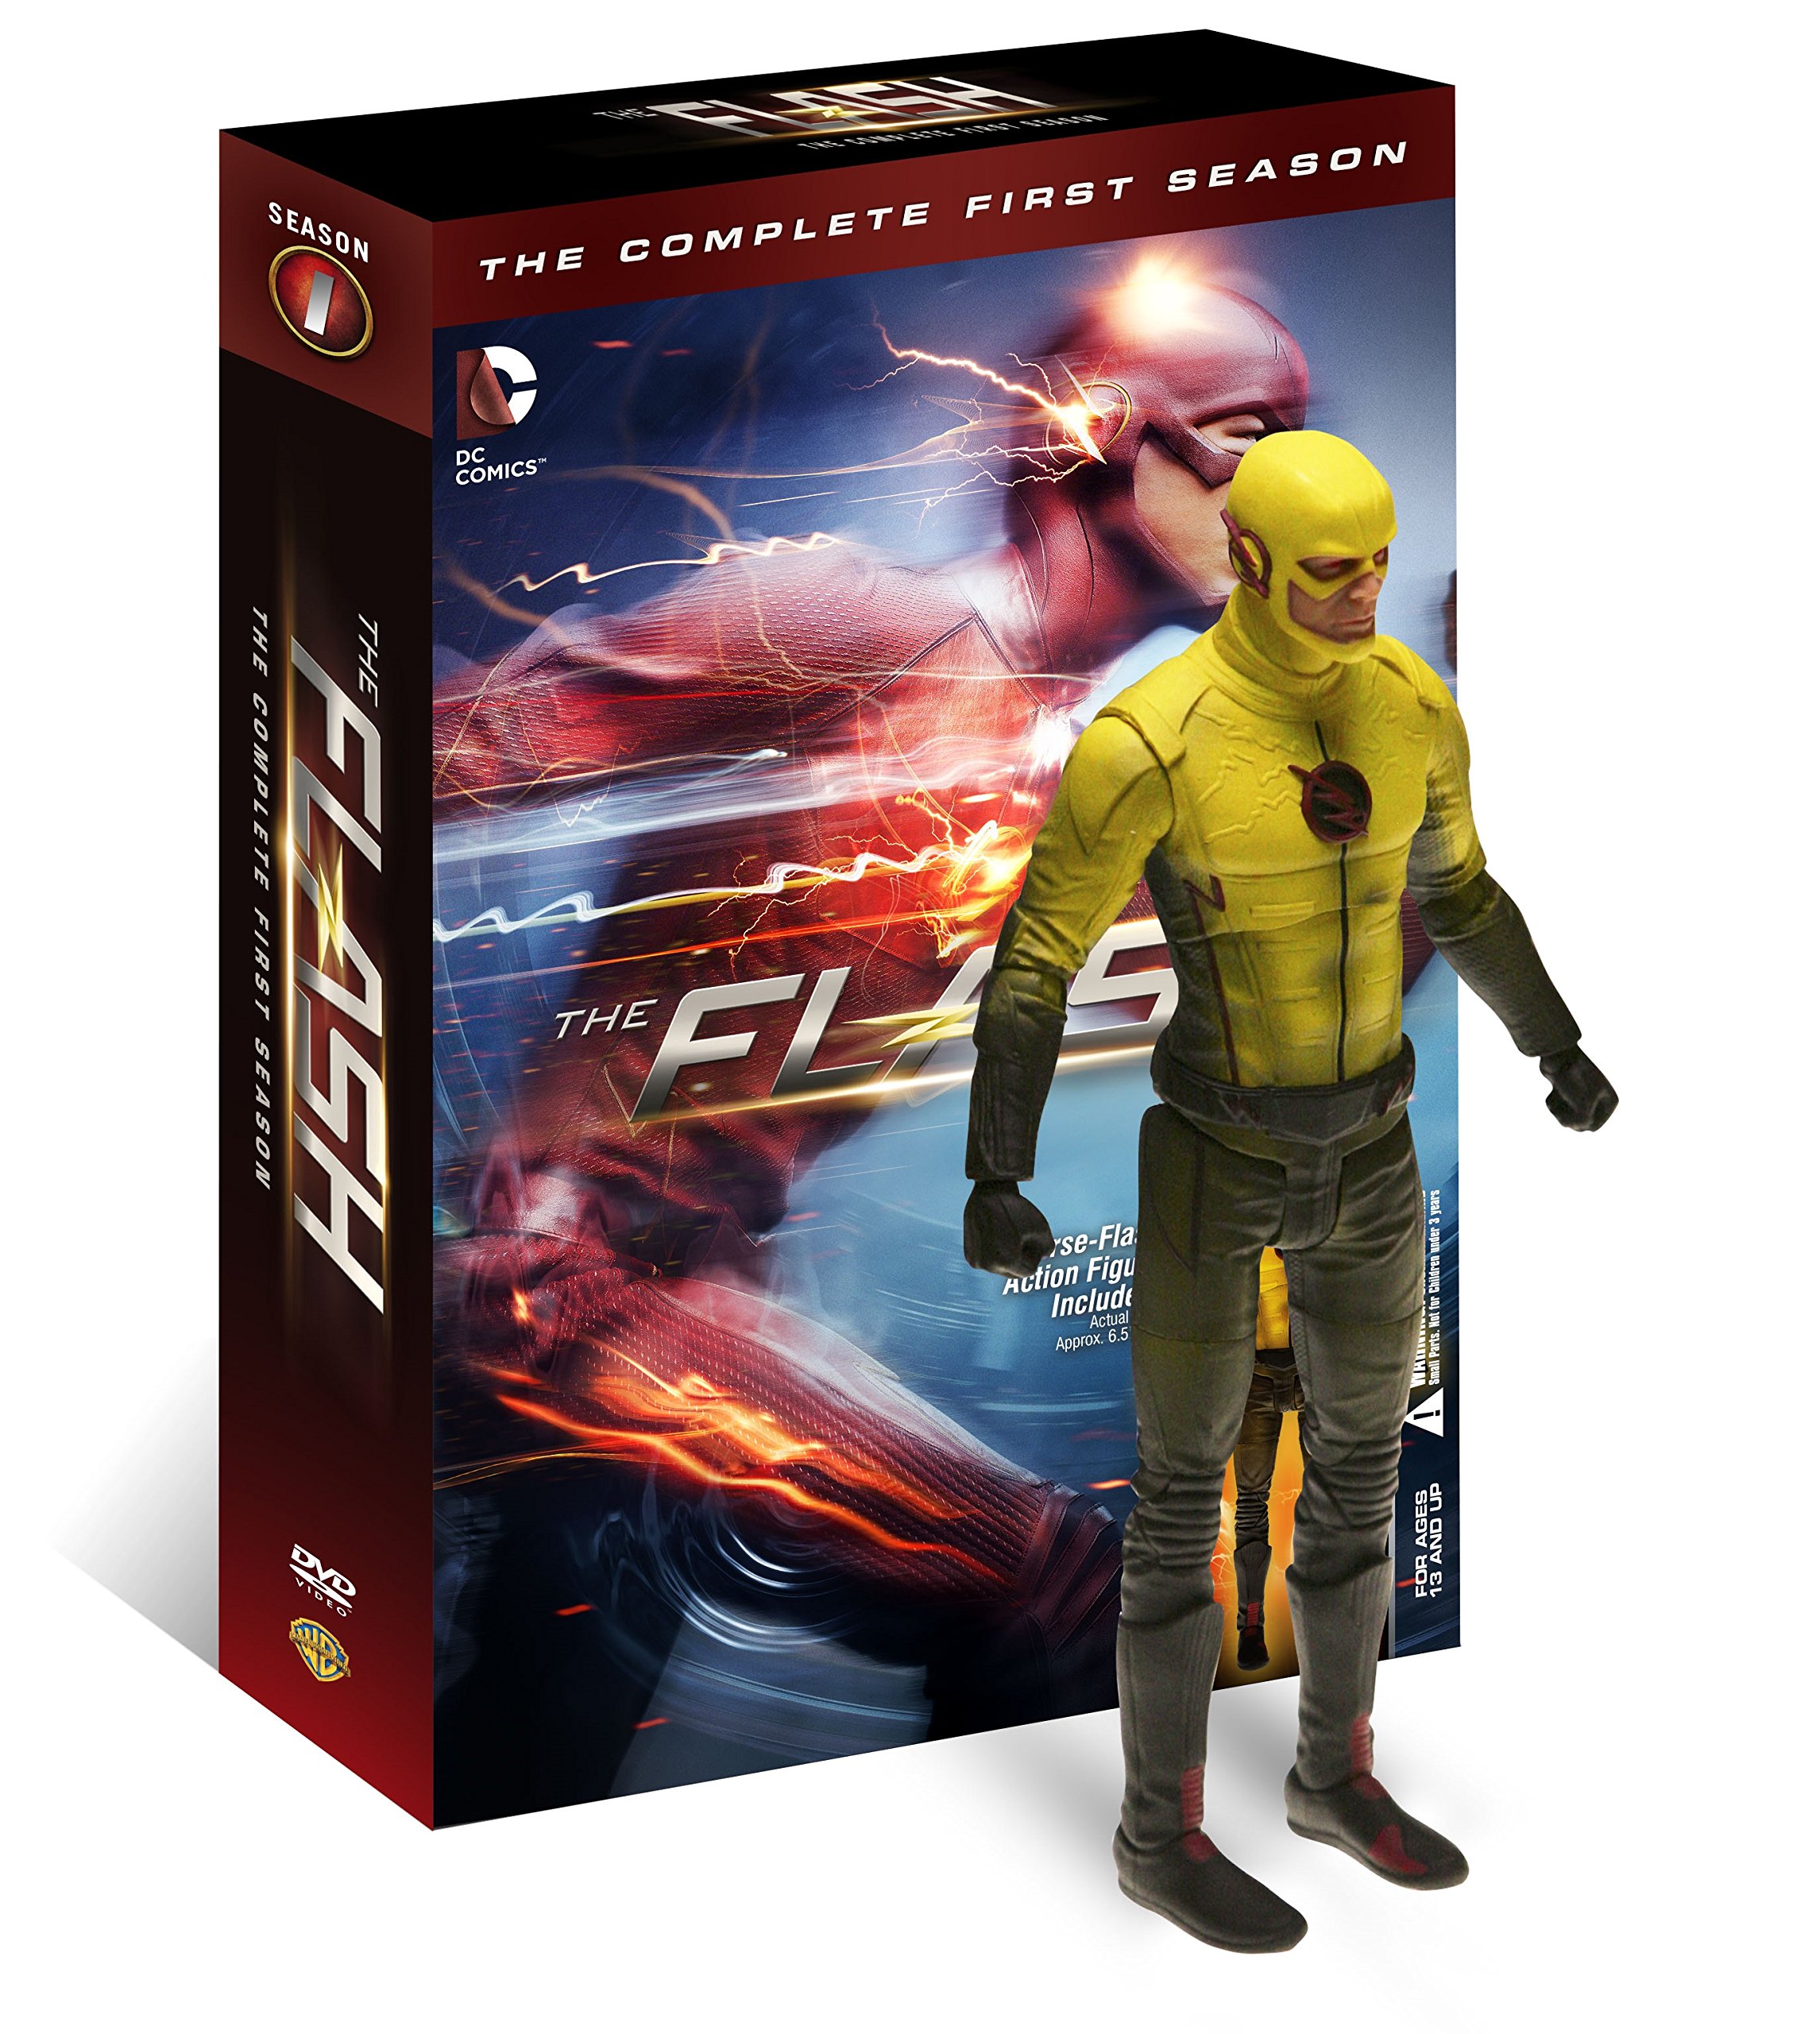 The Flash DVD Release Date